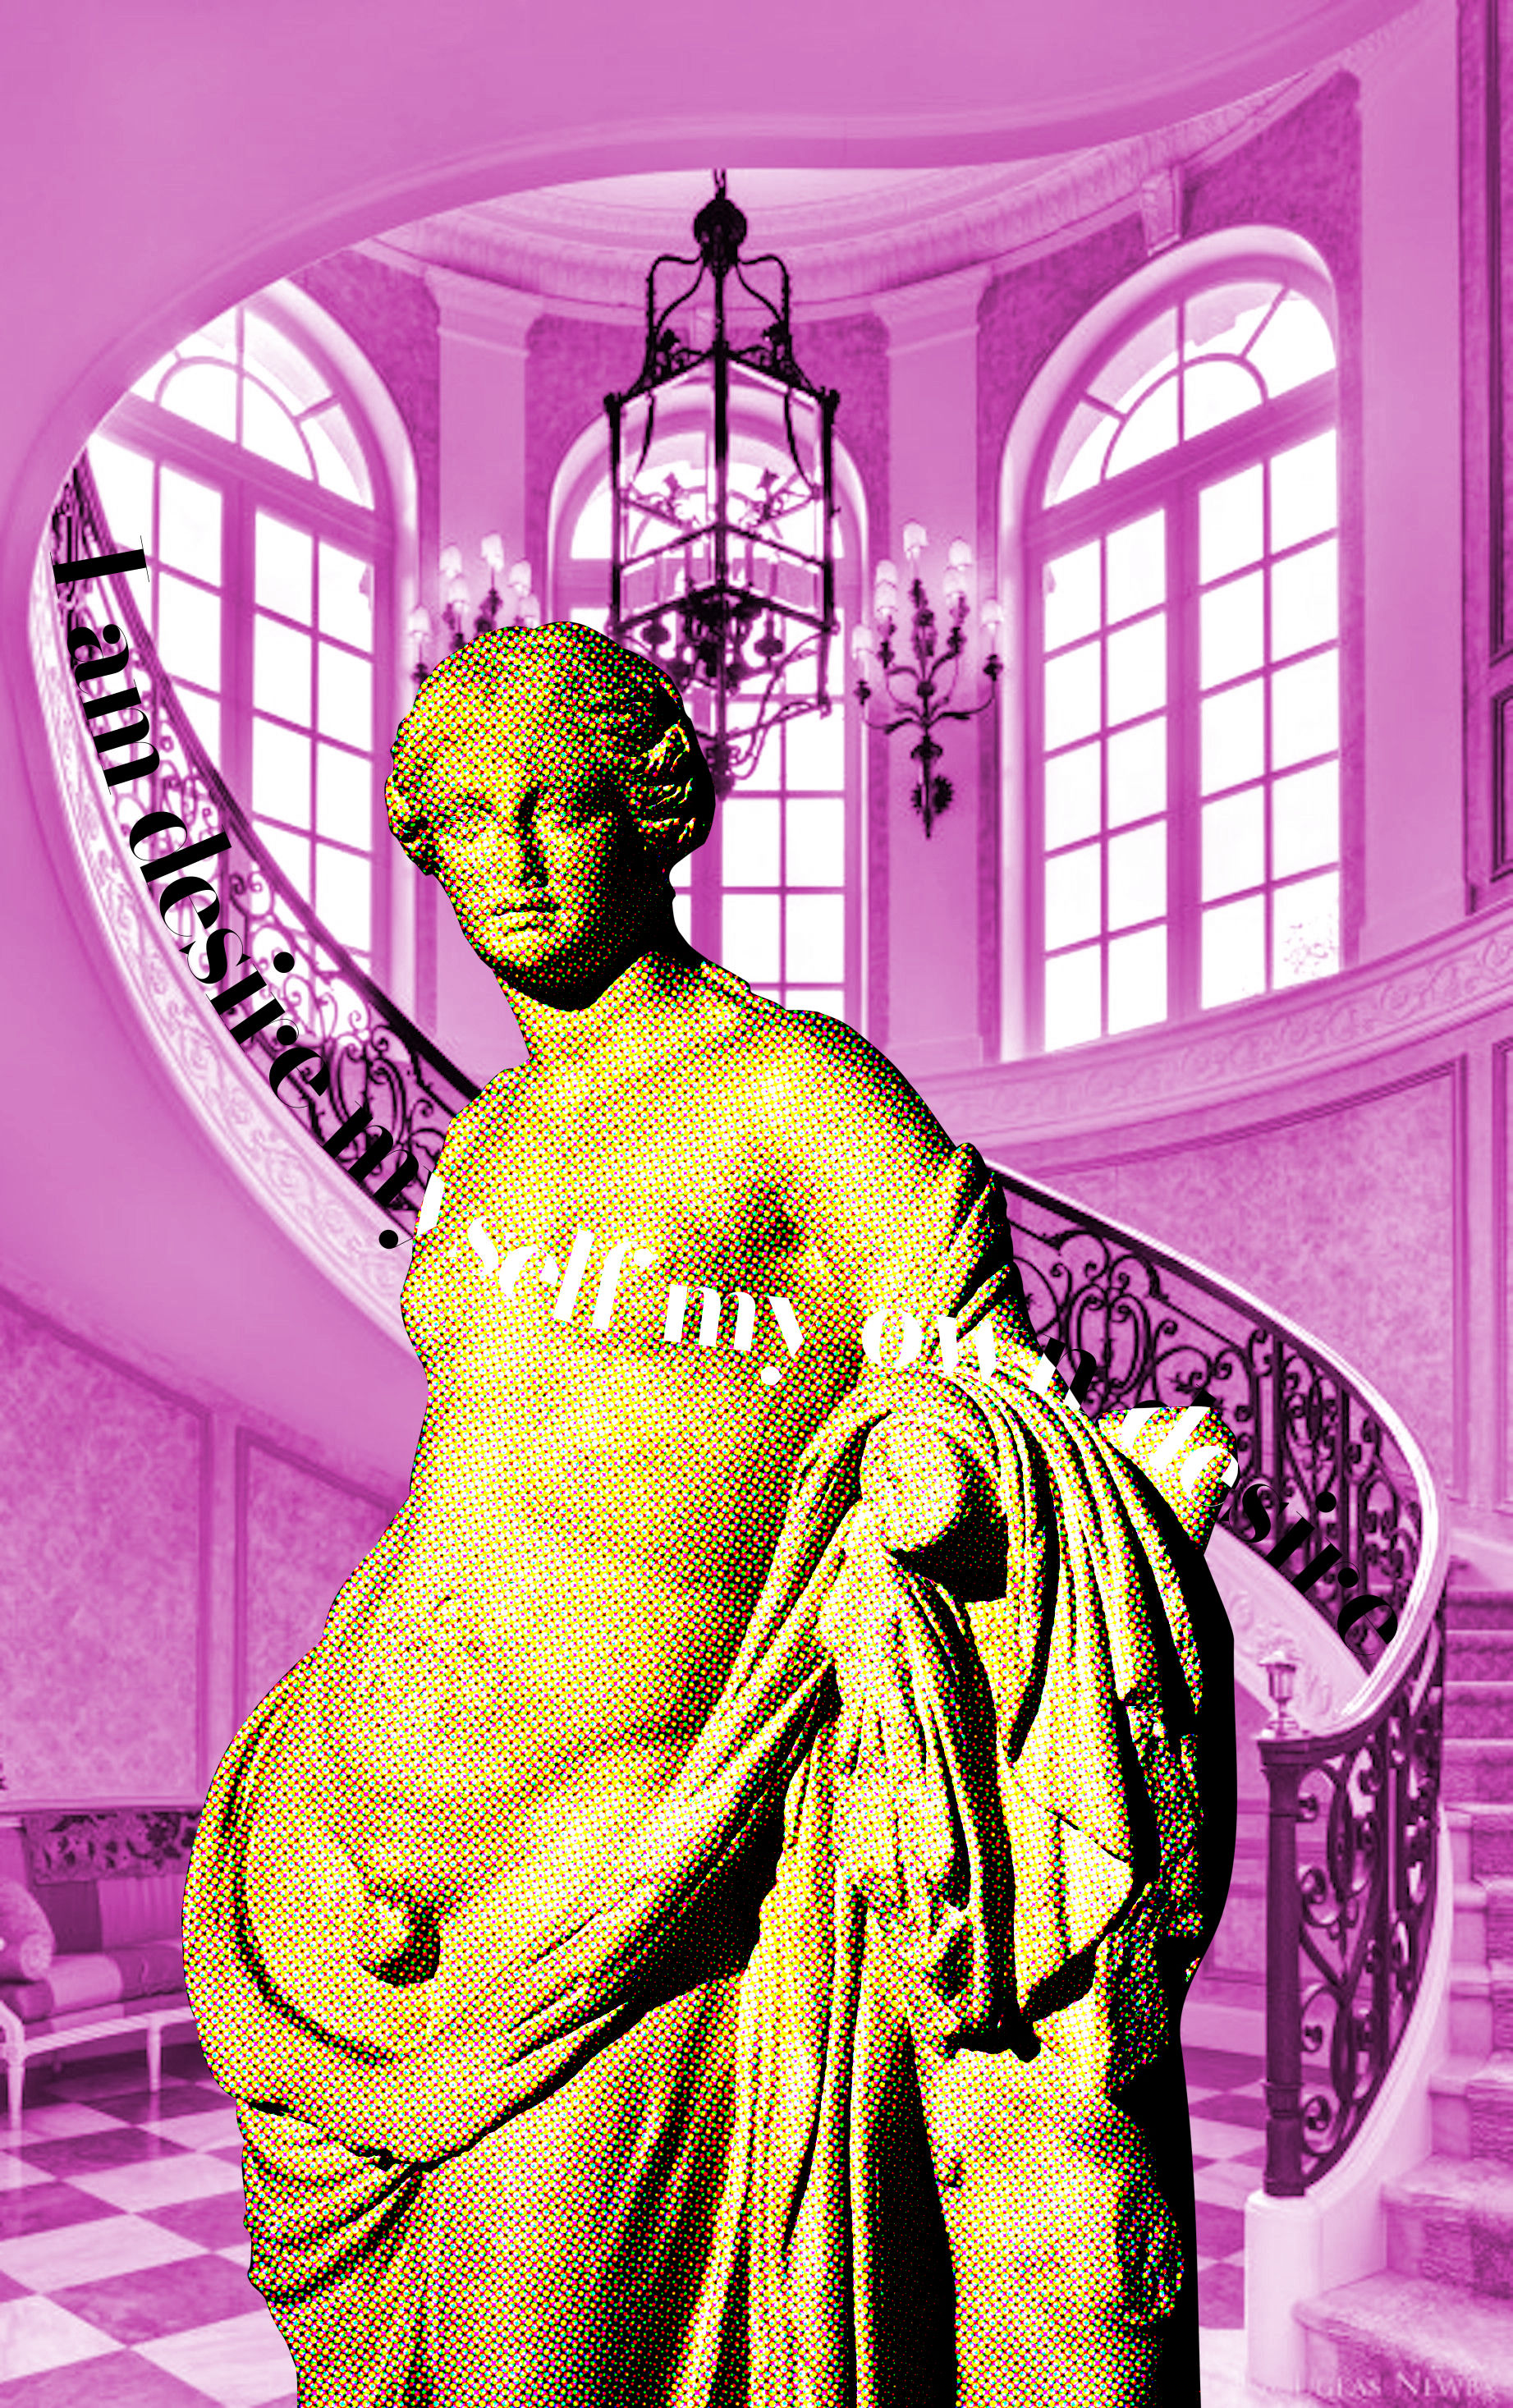 background: a spiralling stairway in a mcmansion, coloured pink. foreground: a yellow halftone statue of hermaphrodites. text in bolded didot type runs down the curve of the stair